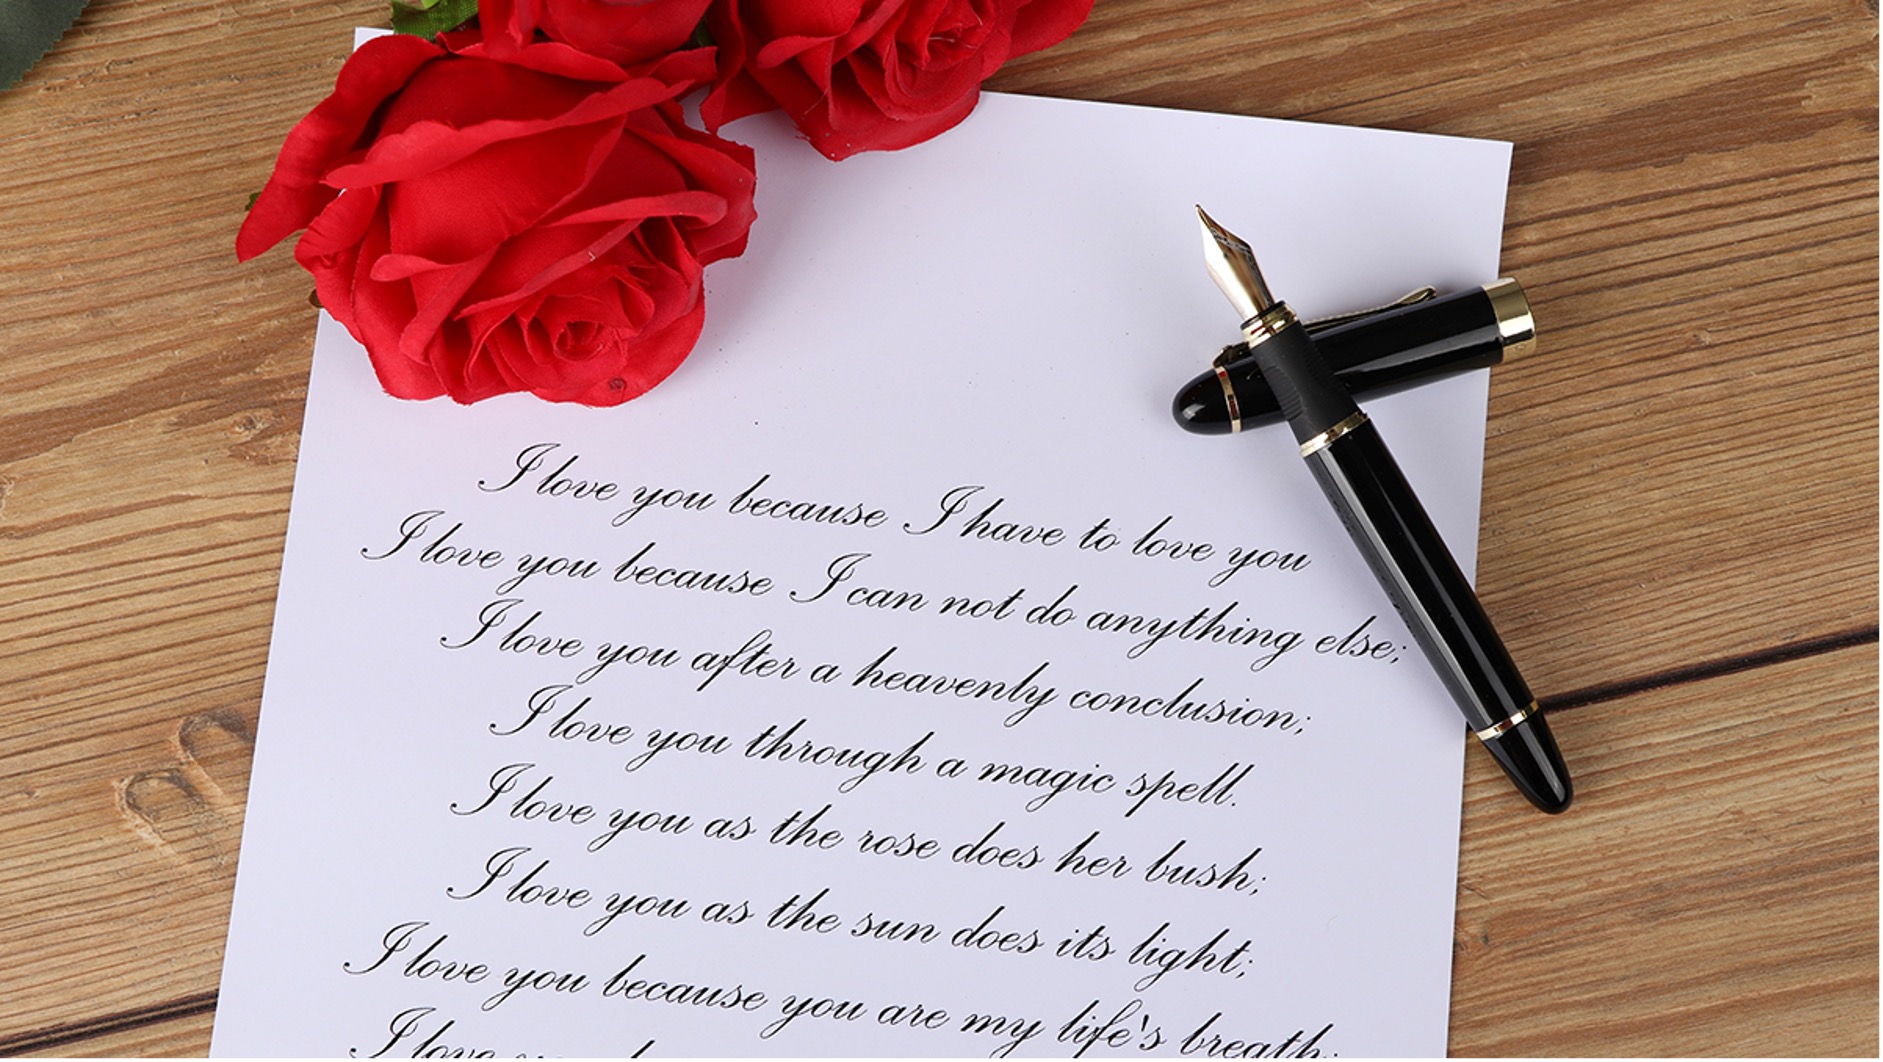 Valentines Day Gift Ideas- Letters, Poems